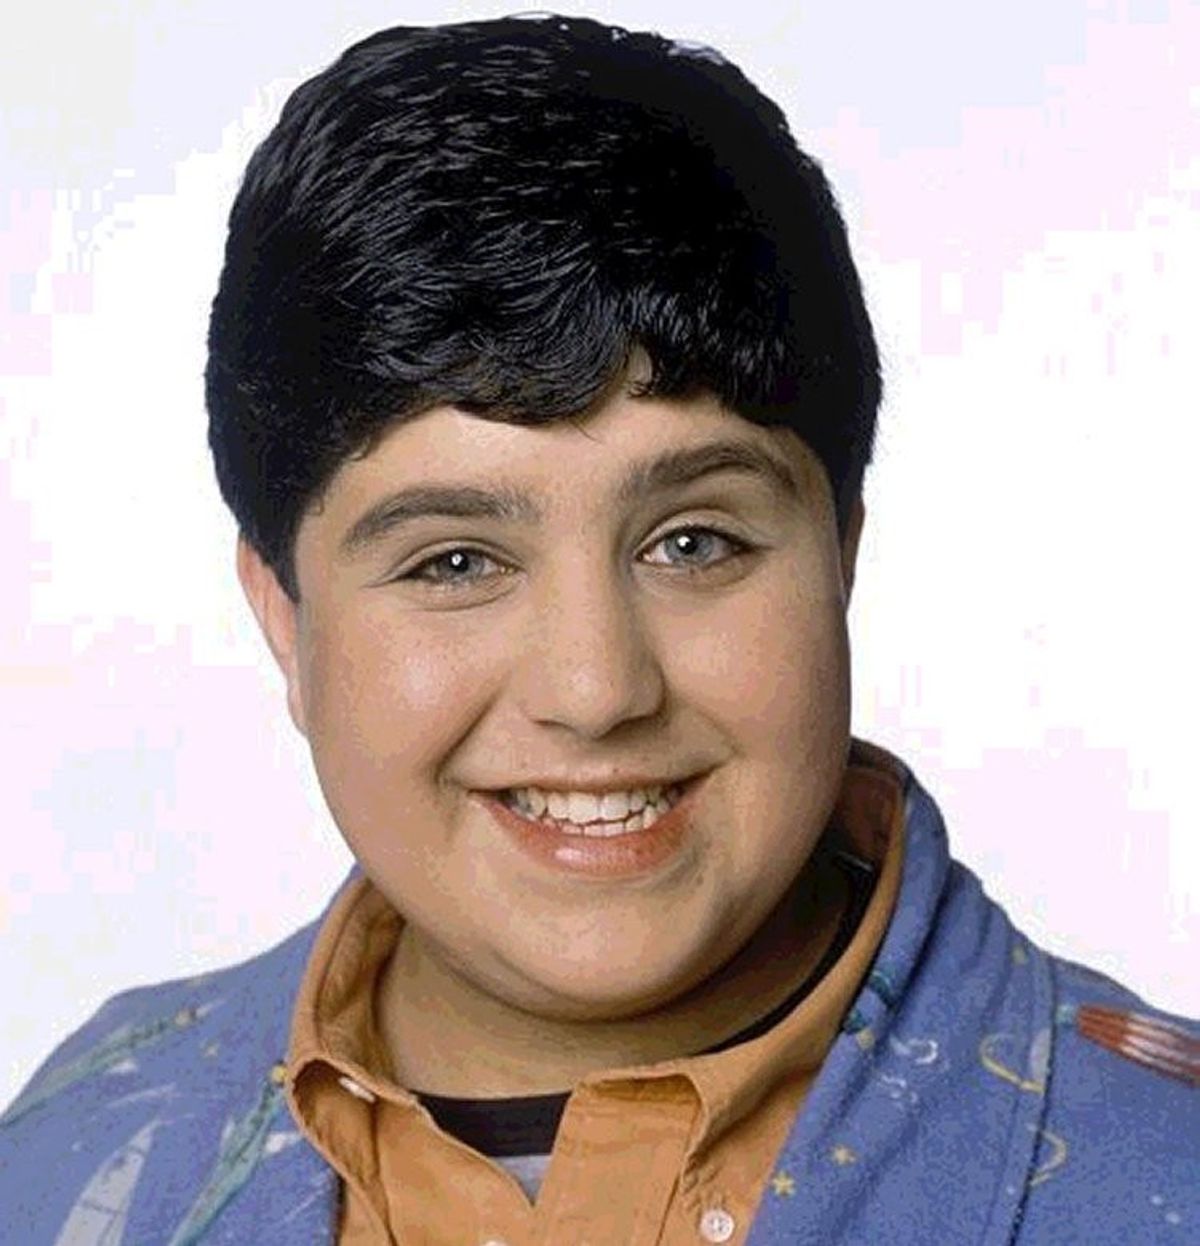 A Night Out As Told By Josh Nichols